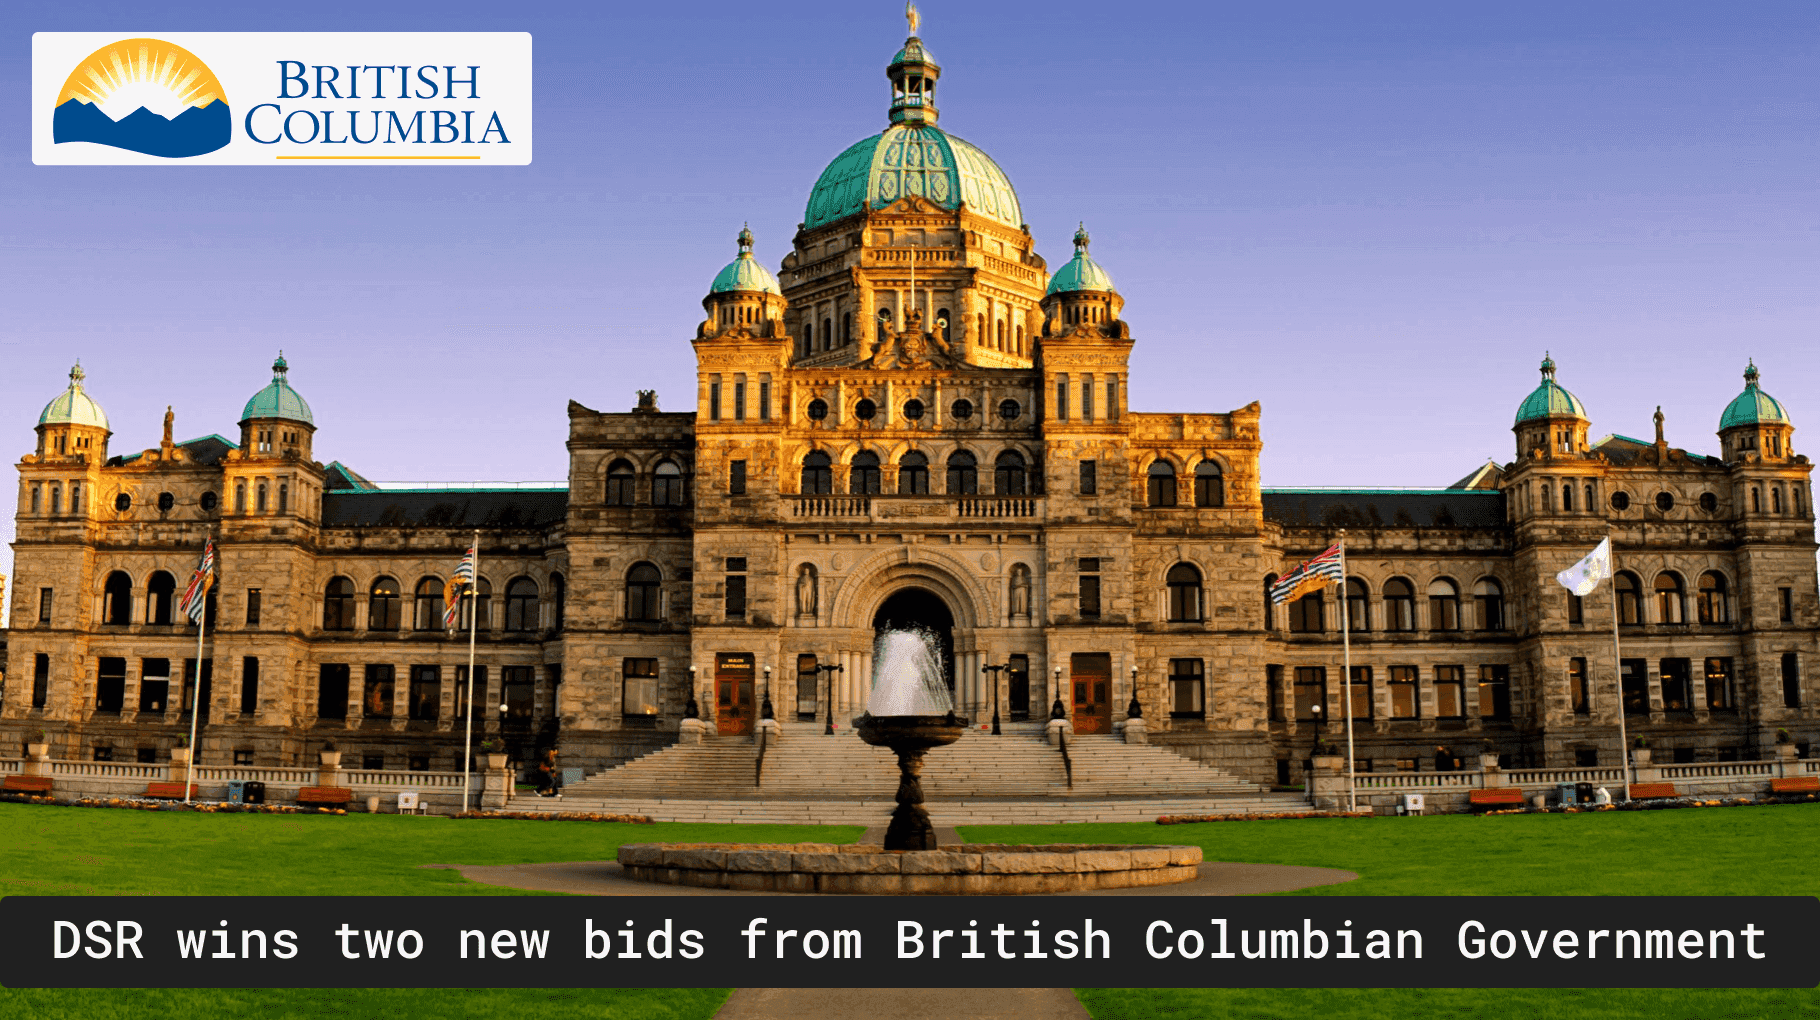 DSR continues partnership with the Government of British Columbia